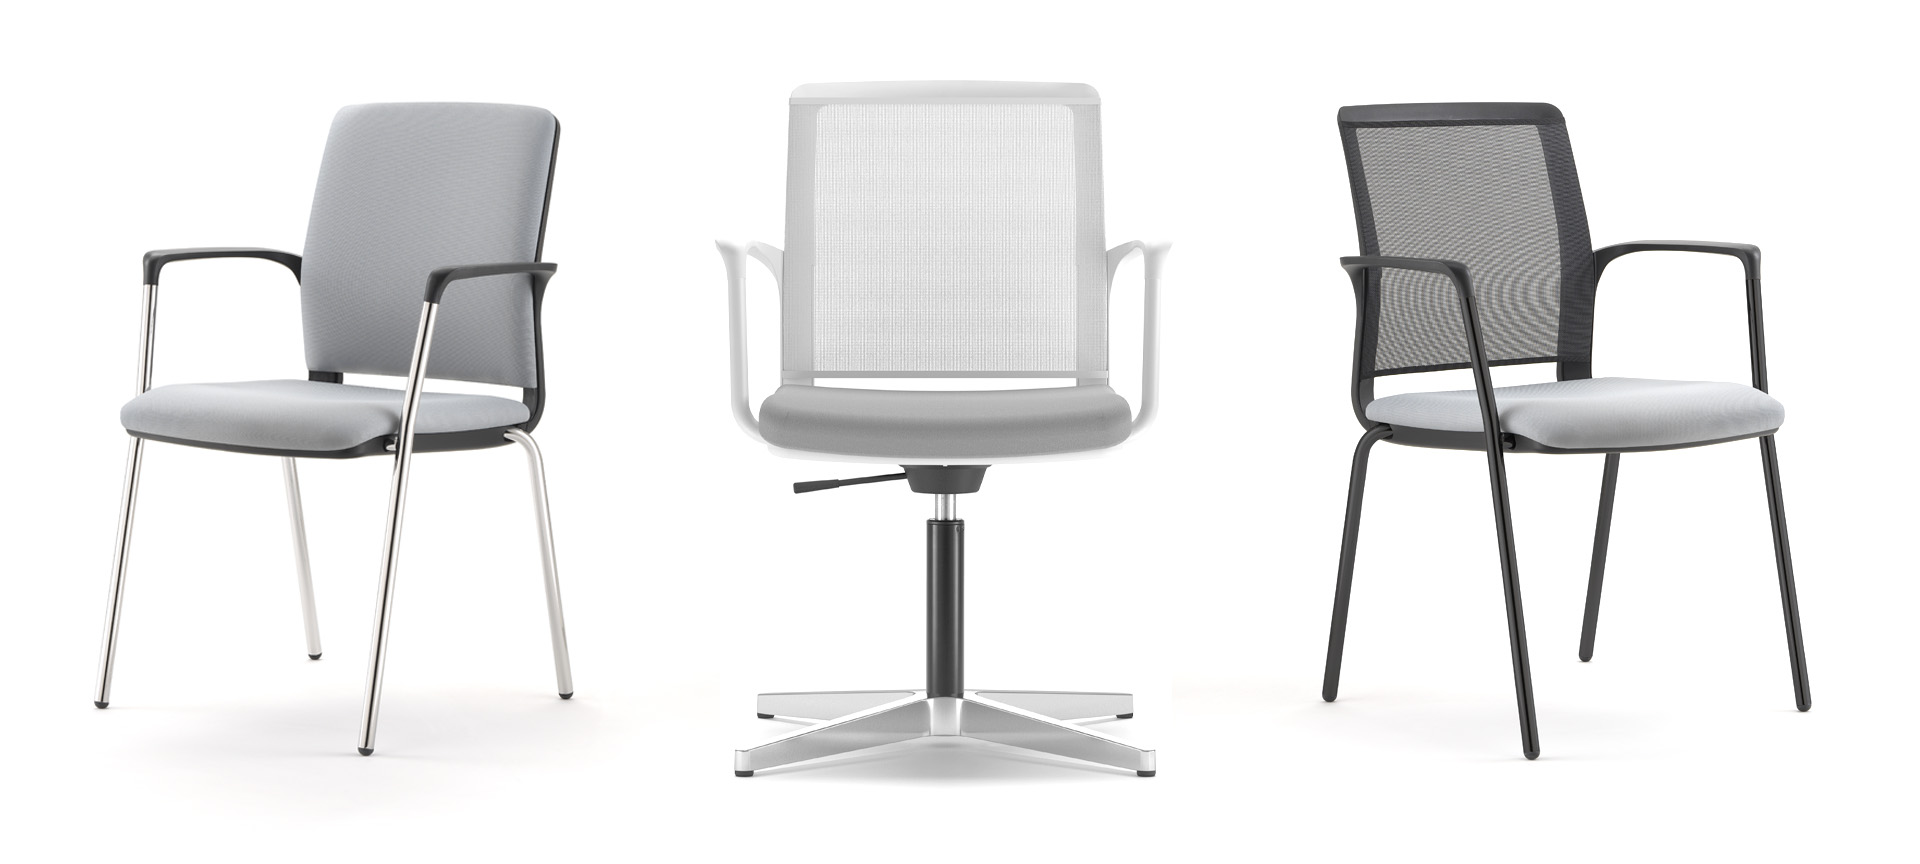 Madrid meeting chairs from Formetiq